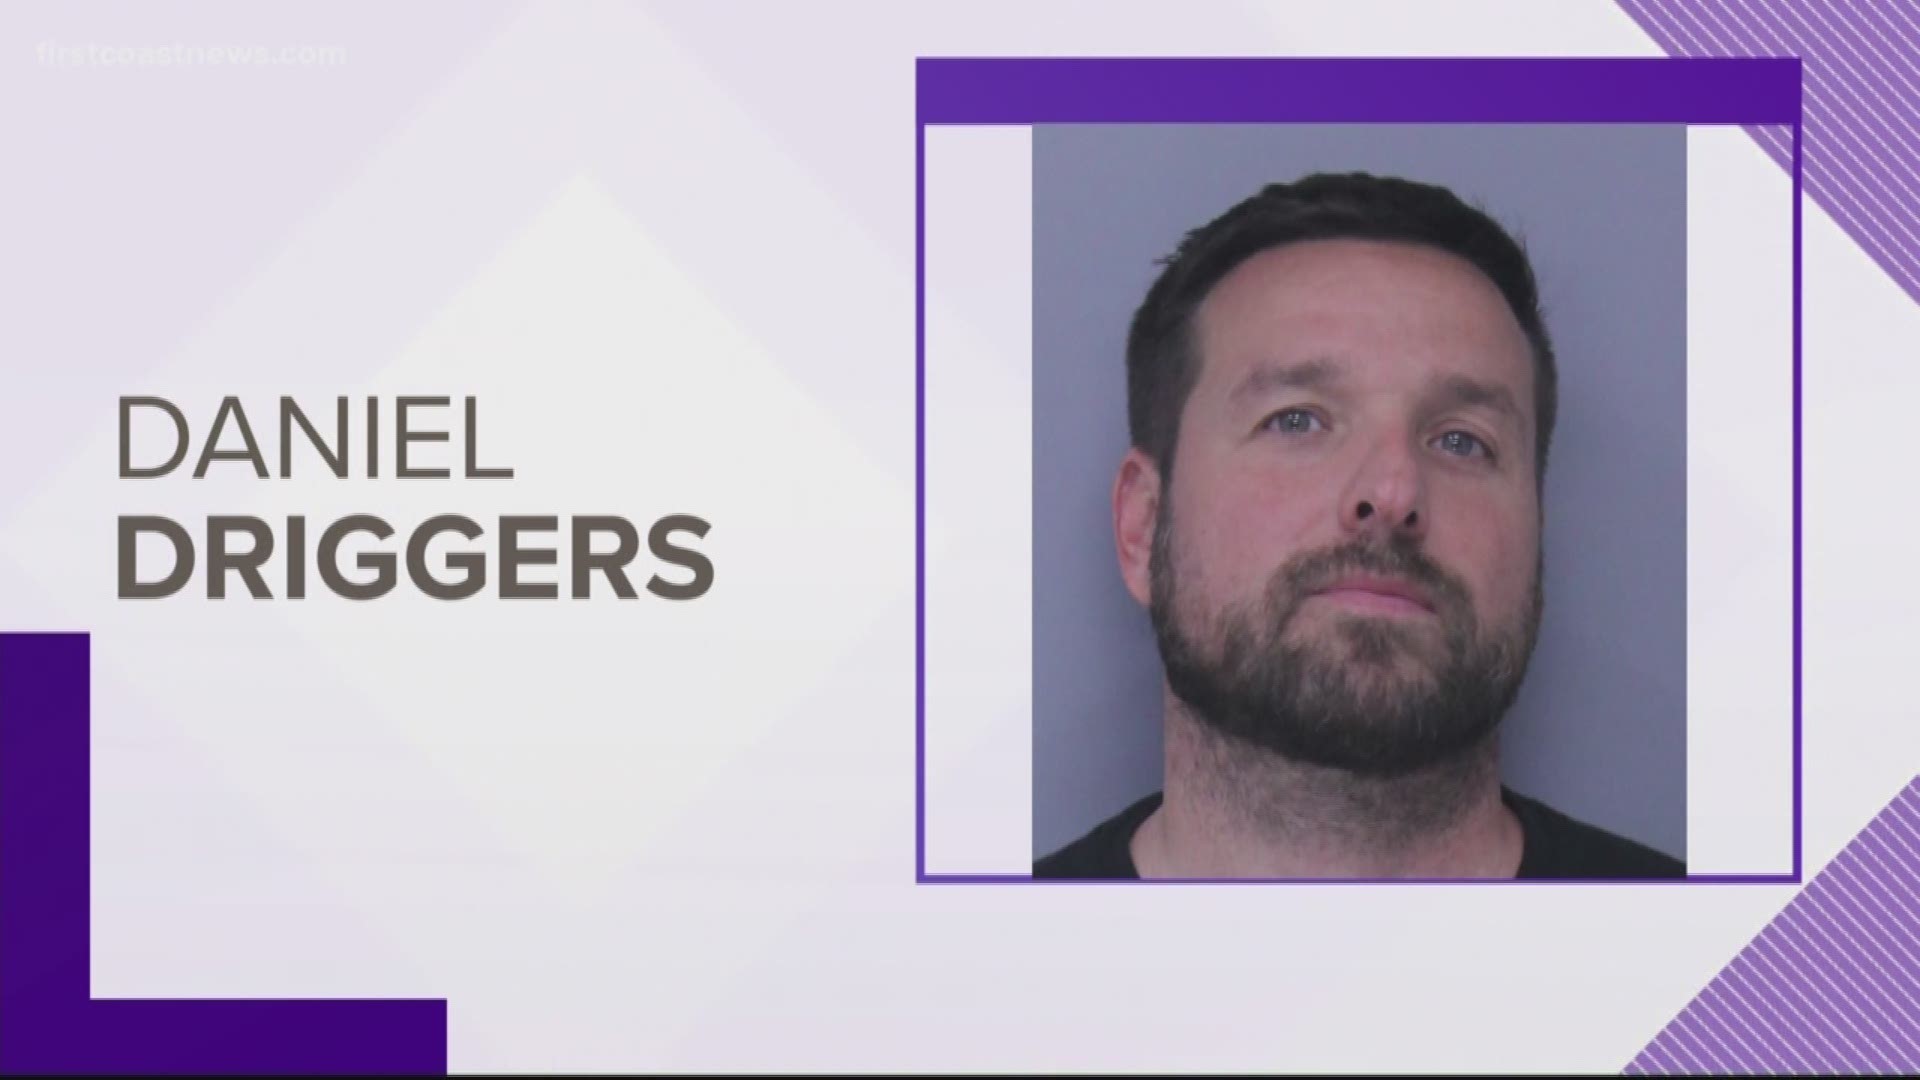 The St. Johns County Sheriff's Office said Daniel David Driggers, 43, called the victim over 80 times before she blocked his calls.